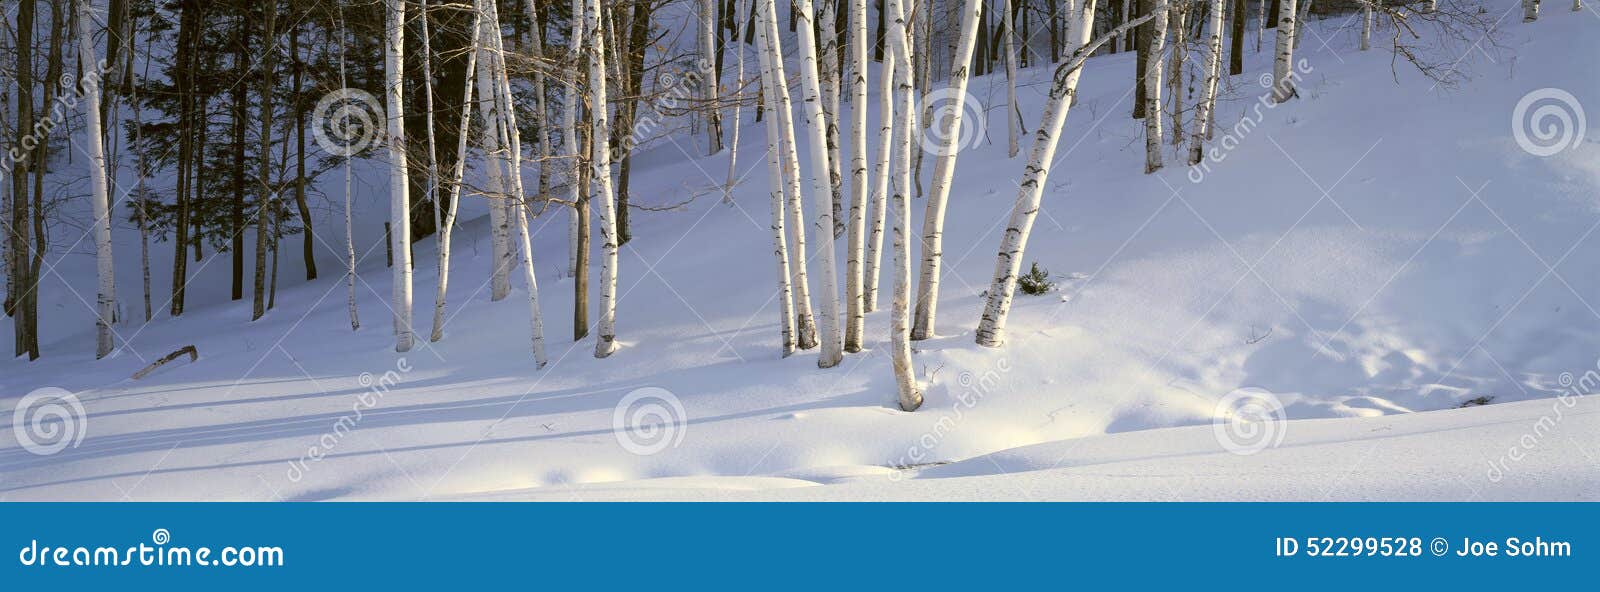 birch trees in the snow, south of woodstock, vermont